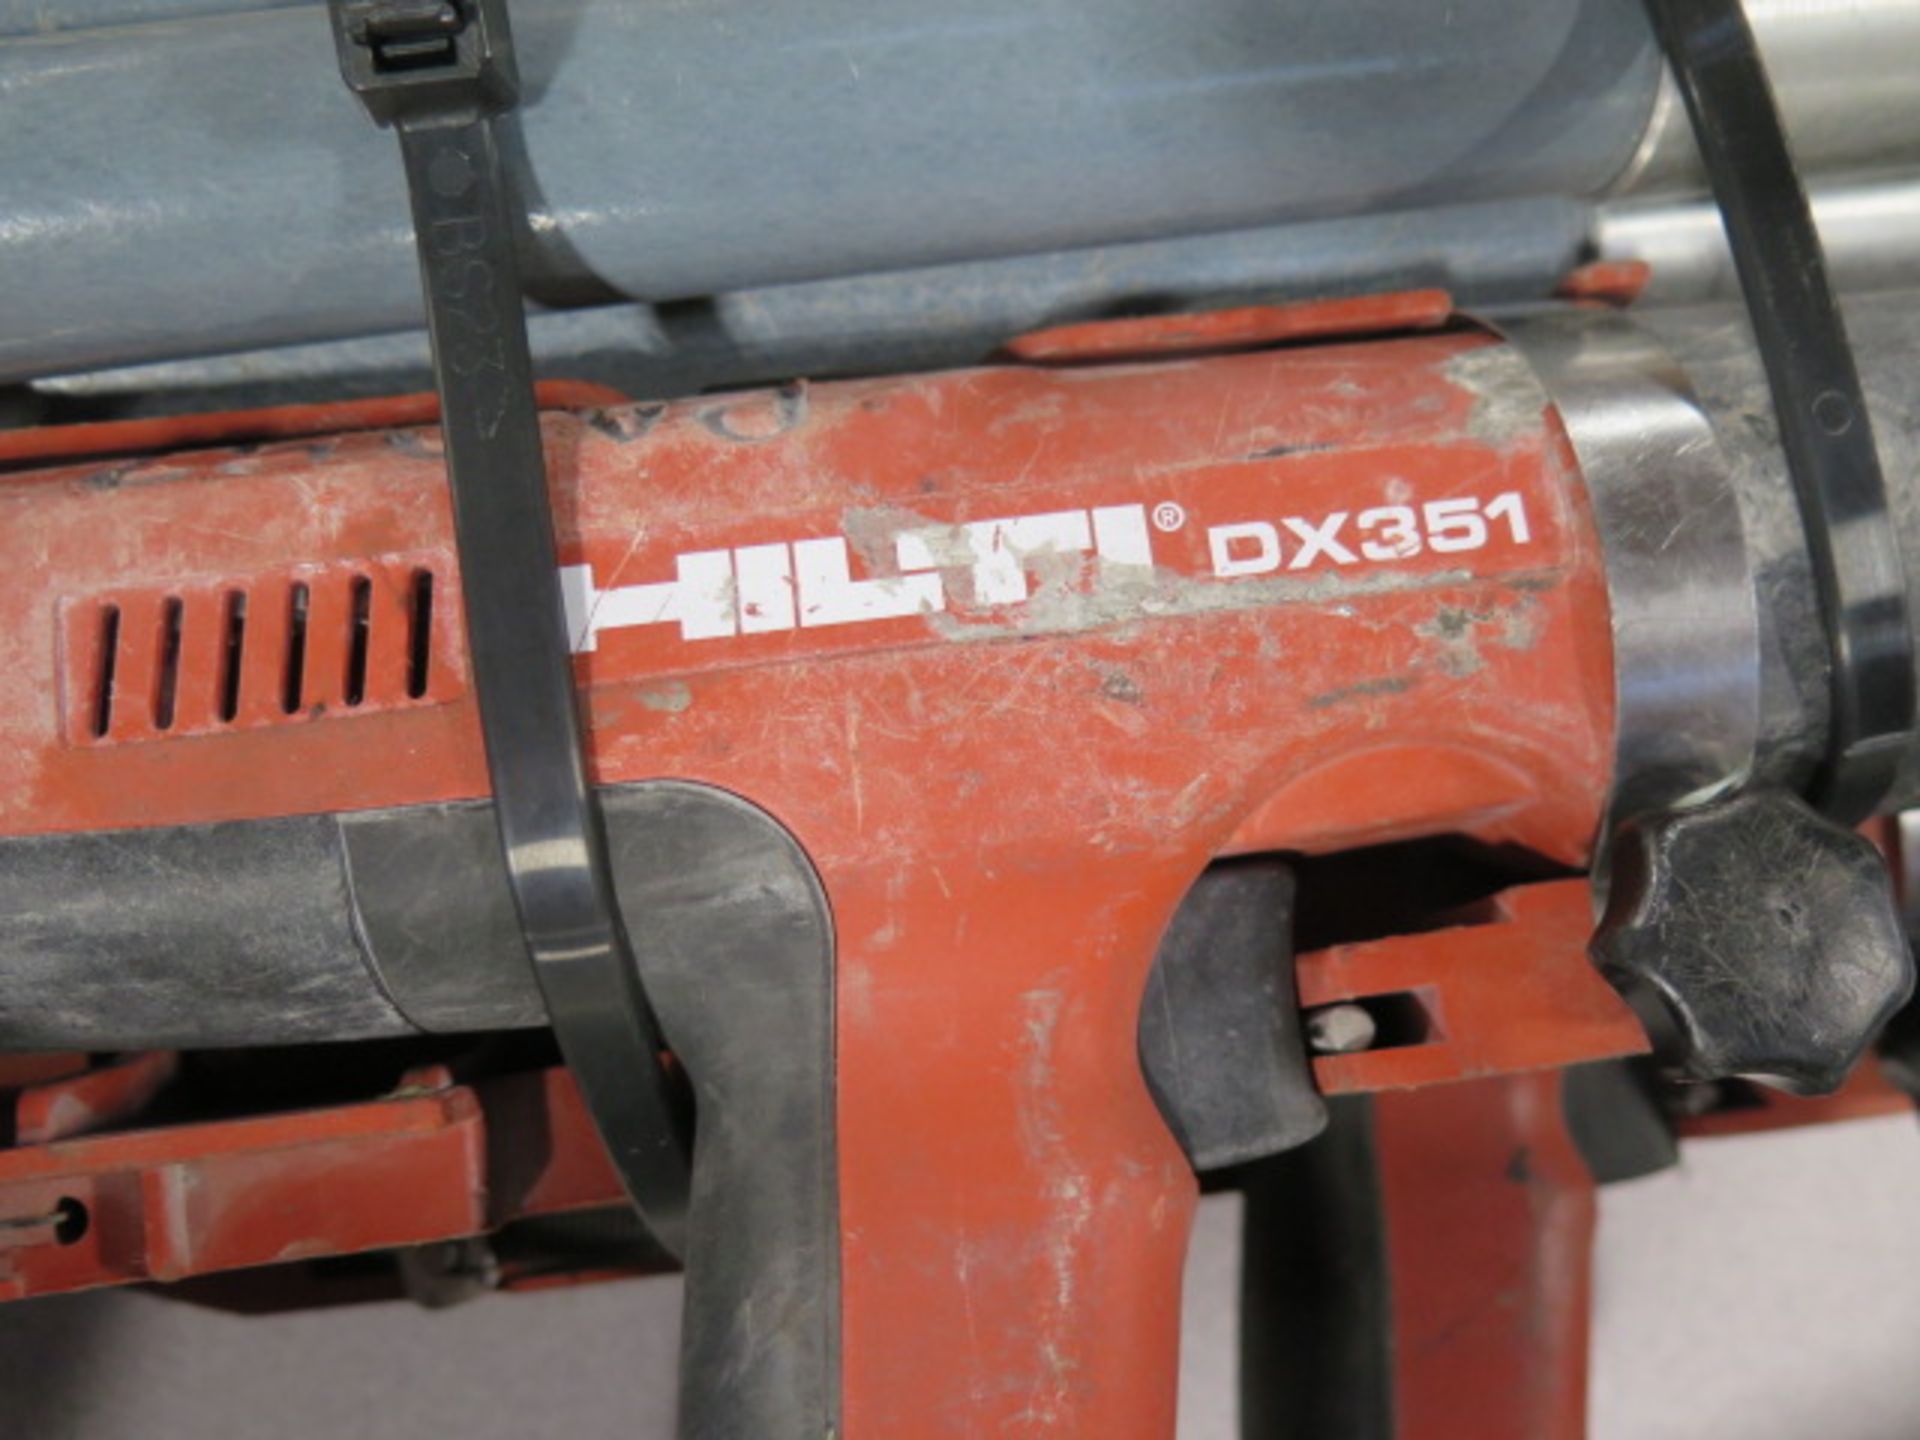 Hilti DX351 Powder Actuated Guns (2) w/ Extension Sets (SOLD AS-IS - NO WARRANTY) - Image 3 of 3